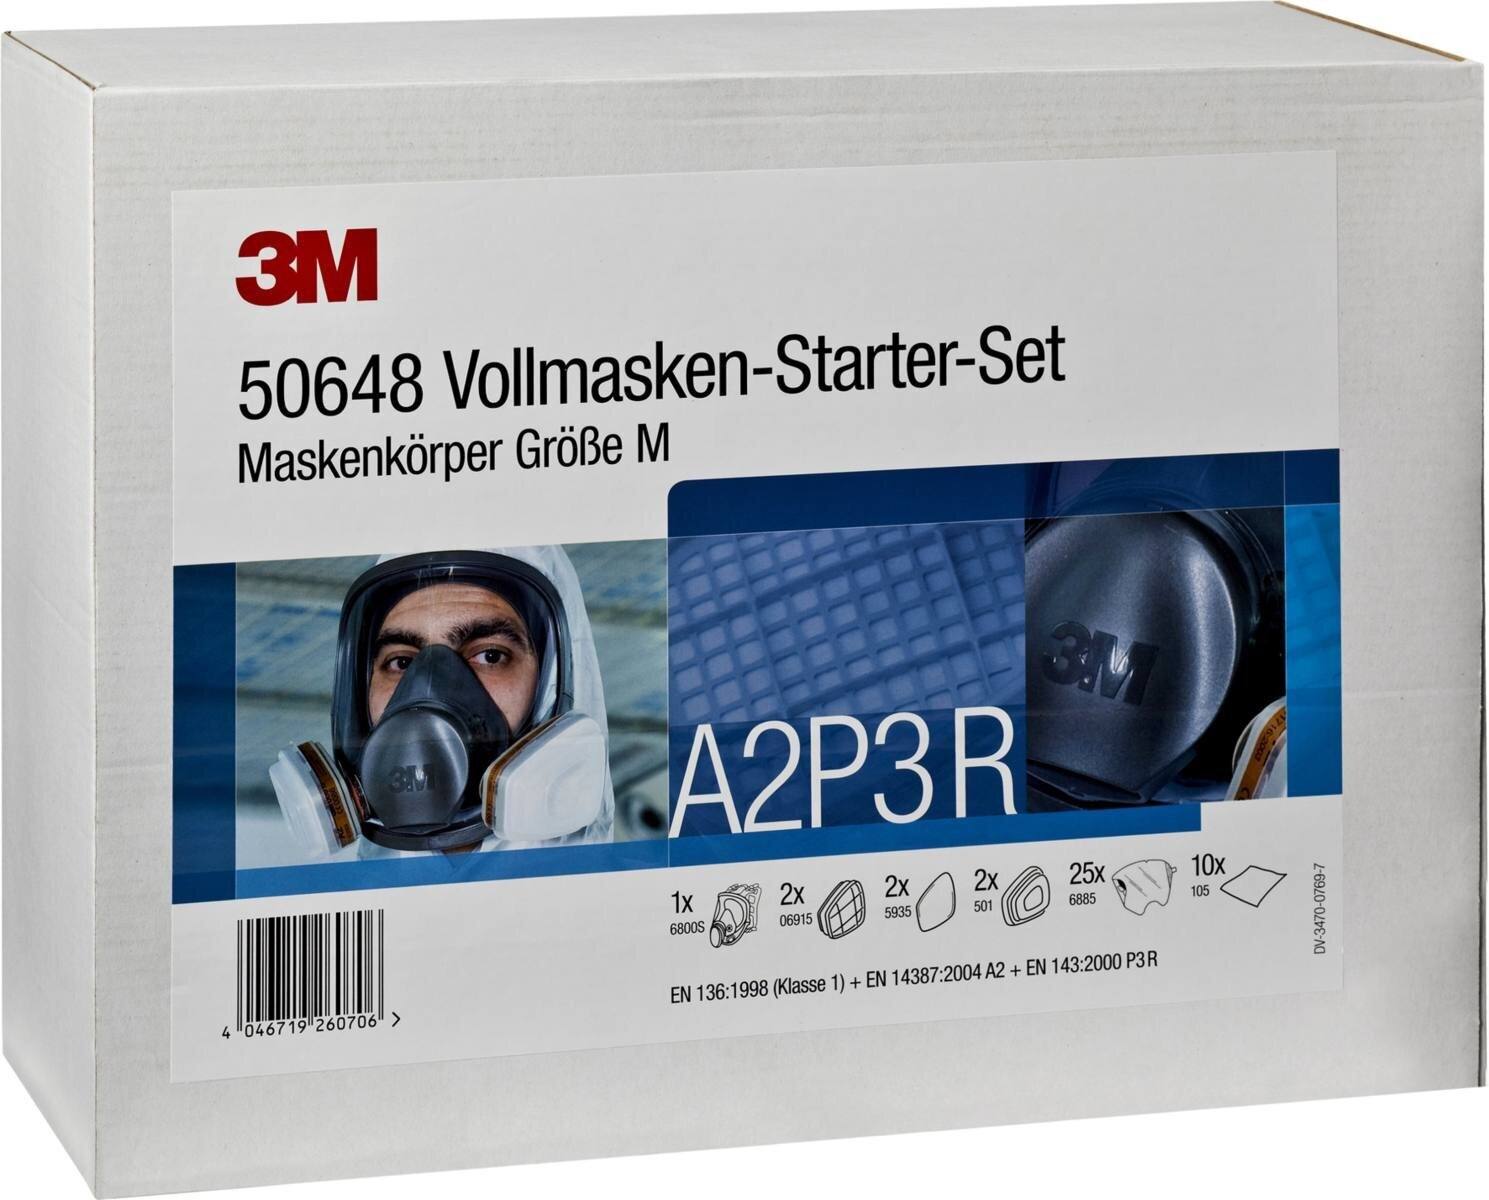 3M 50648 Full face mask starter set, 1x full face mask body 6800 size M, 2x gas/vapor filter 06915 A2*, 2x particle filter 5935 P3R, 2x filter cover 501, 25x visor protection foil 6885, 10x cleaning cloths 105, *corresponds to filter 6055 A2